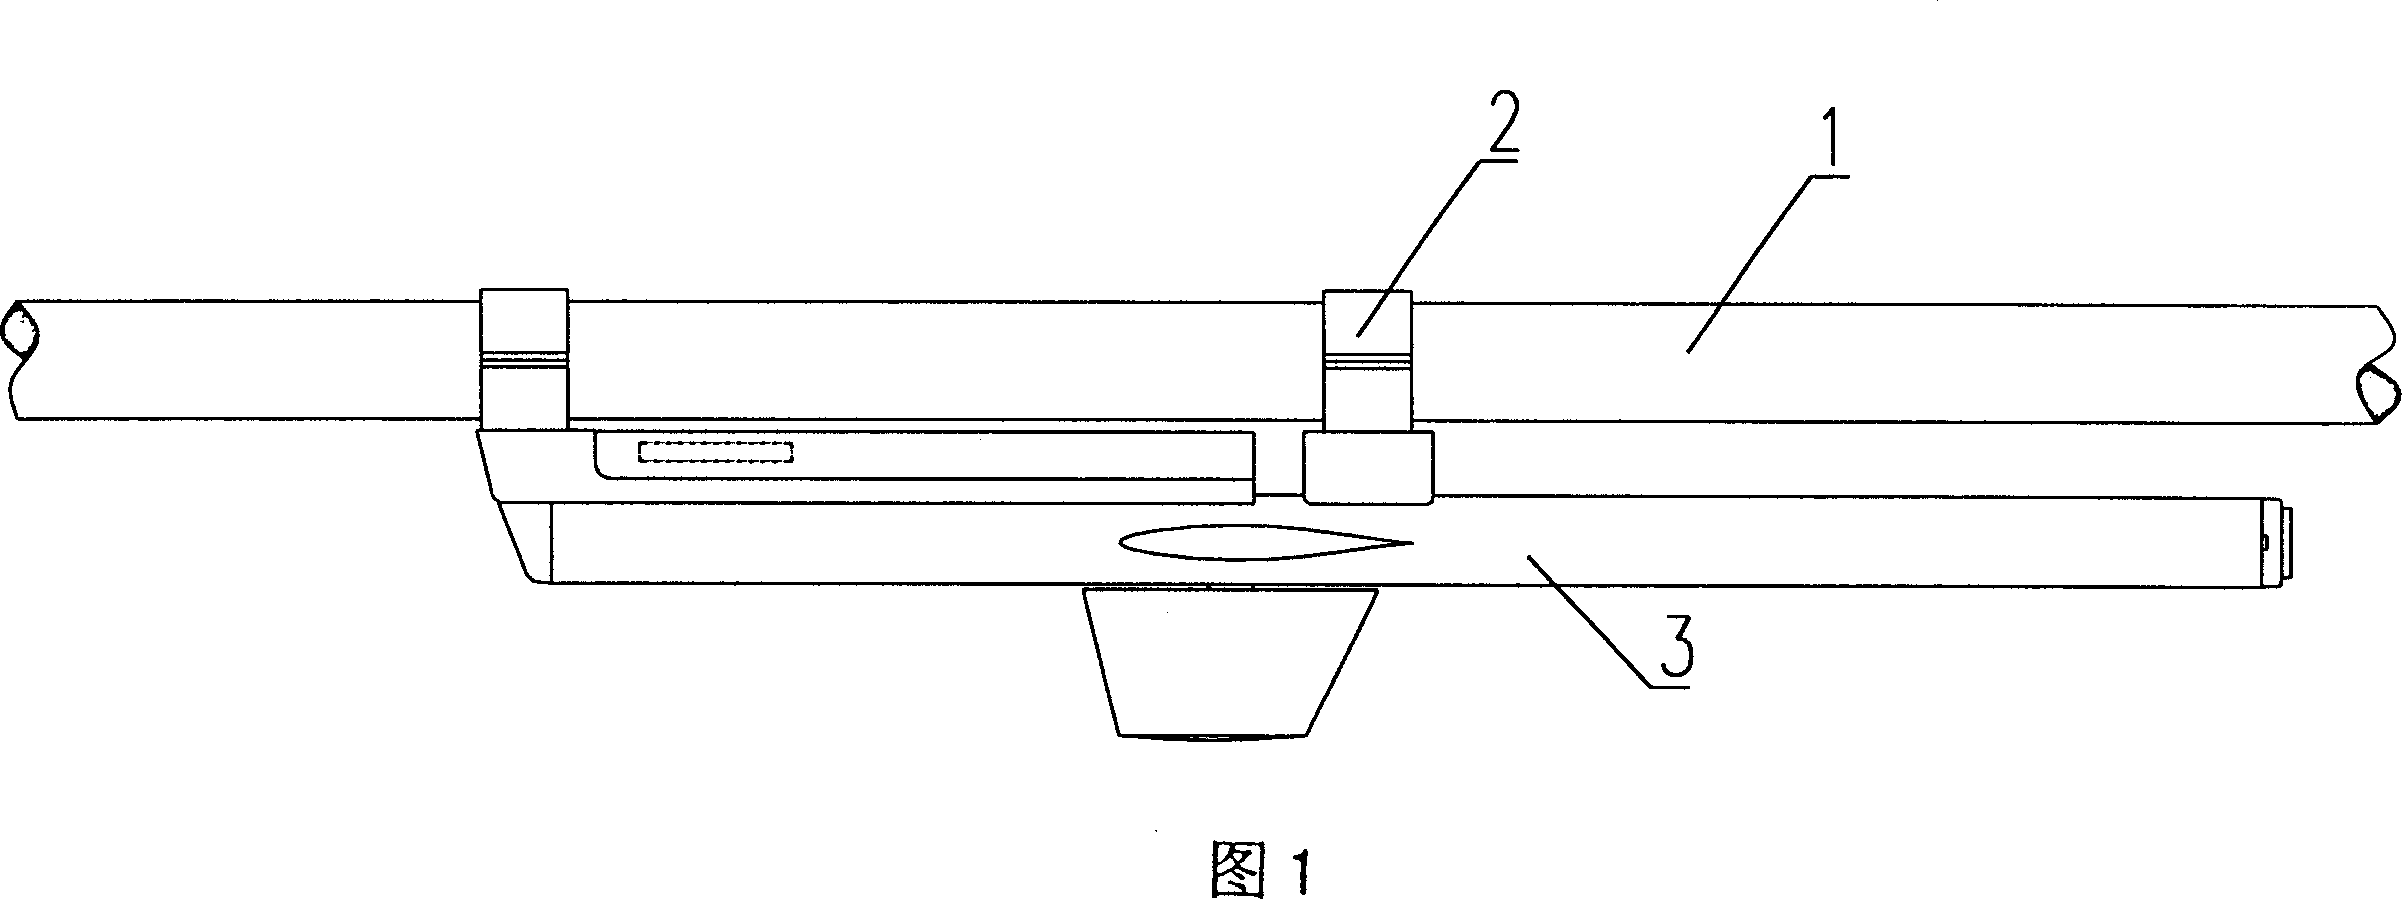 Ocean towing linear array three-blade balance unfolded device and method for determining zero angle of wing plate angle of attack